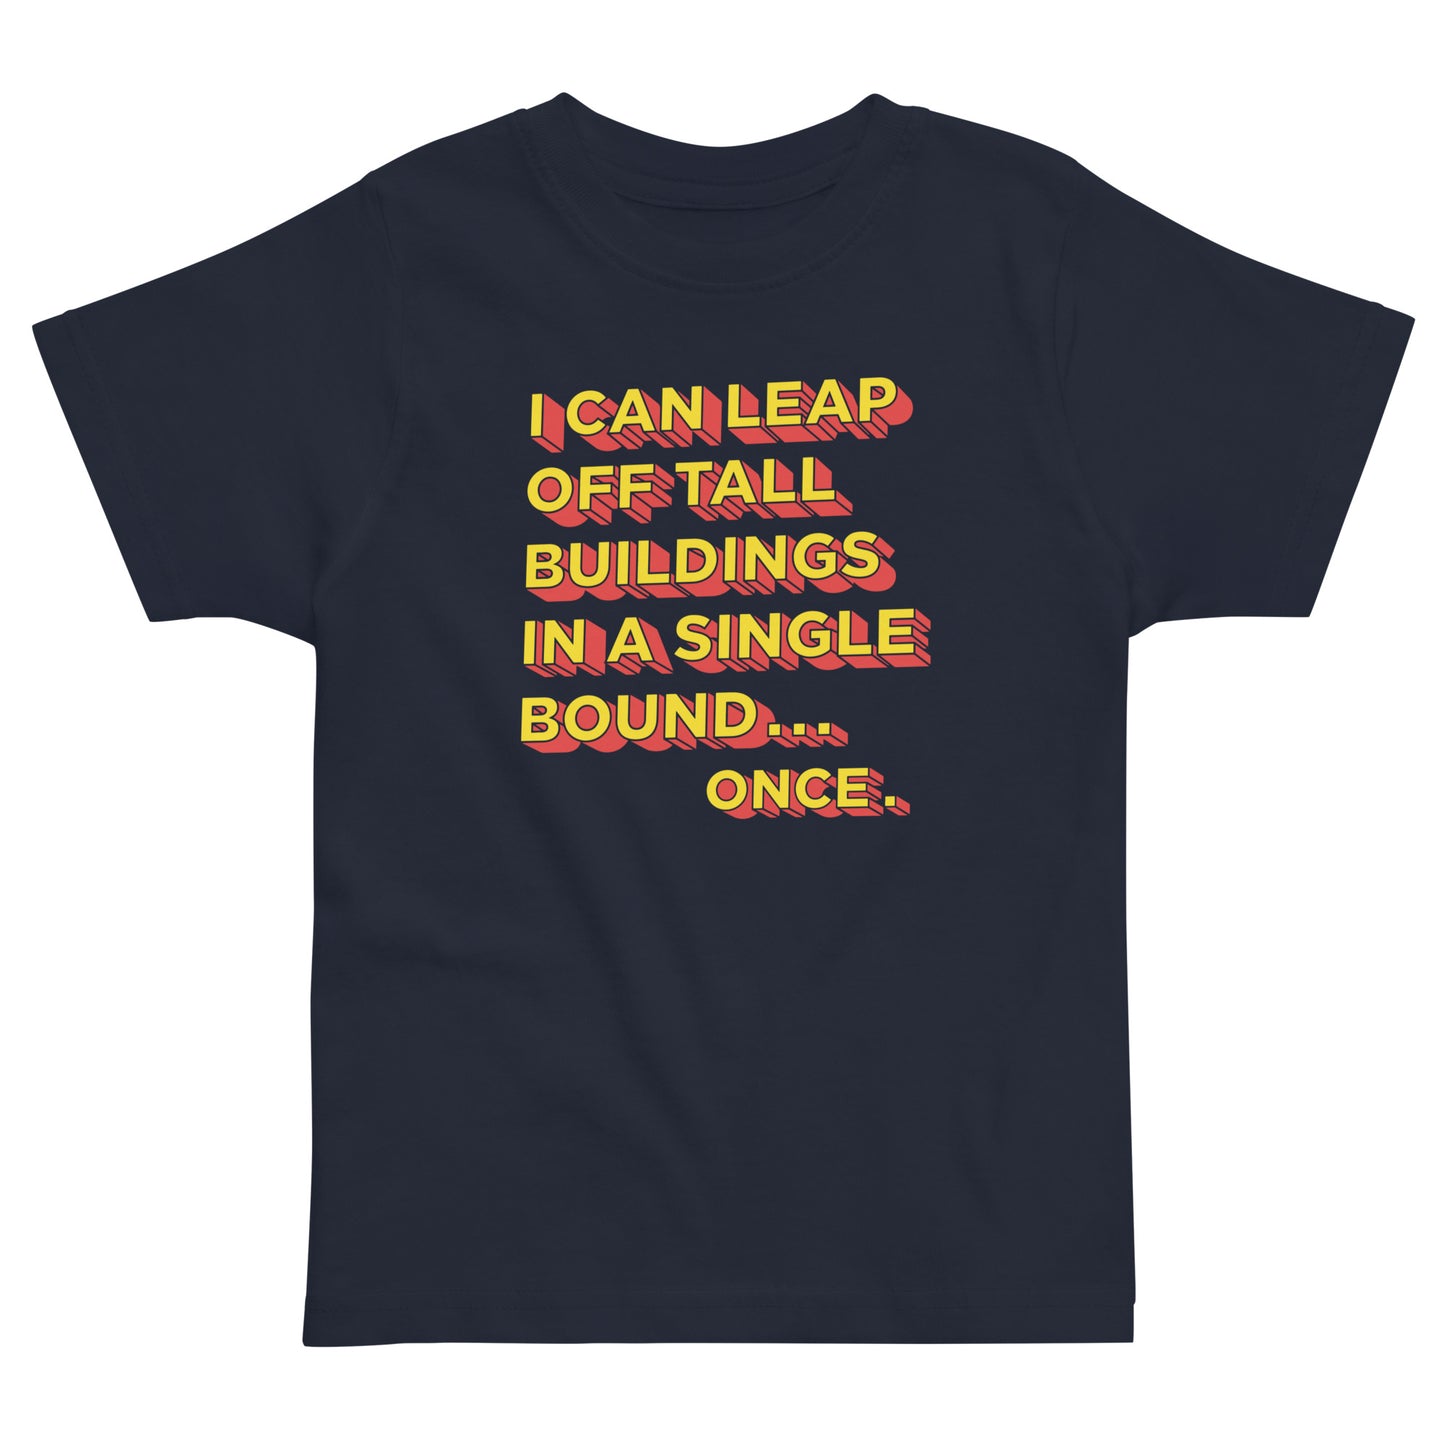 Tall Buildings In A Single Bound Kid's Toddler Tee